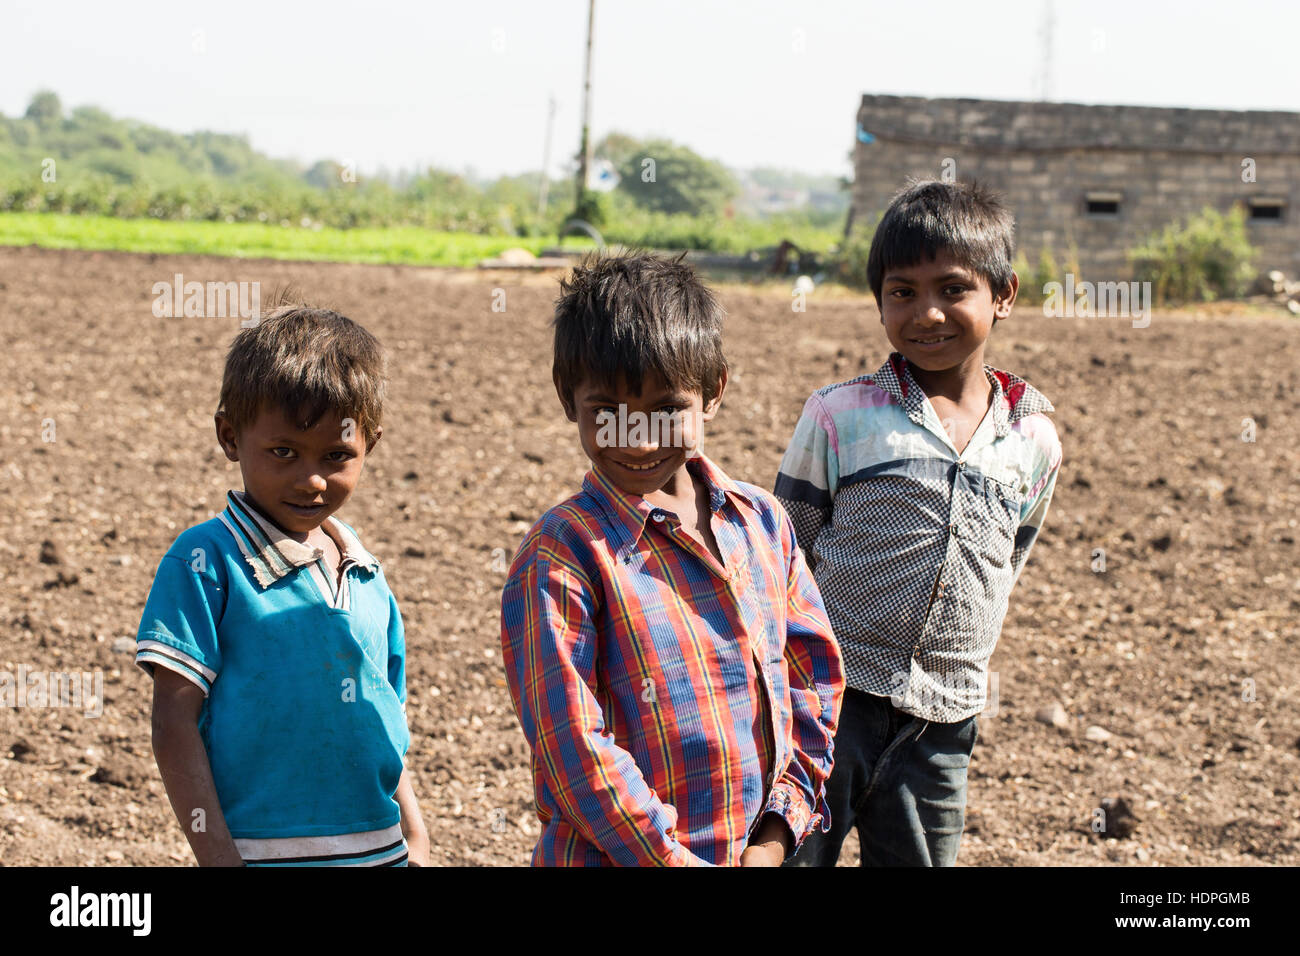 Farm labourer's children wait for their parents to finish for the day, picking cotton in Gujurat, north-west India. Stock Photo